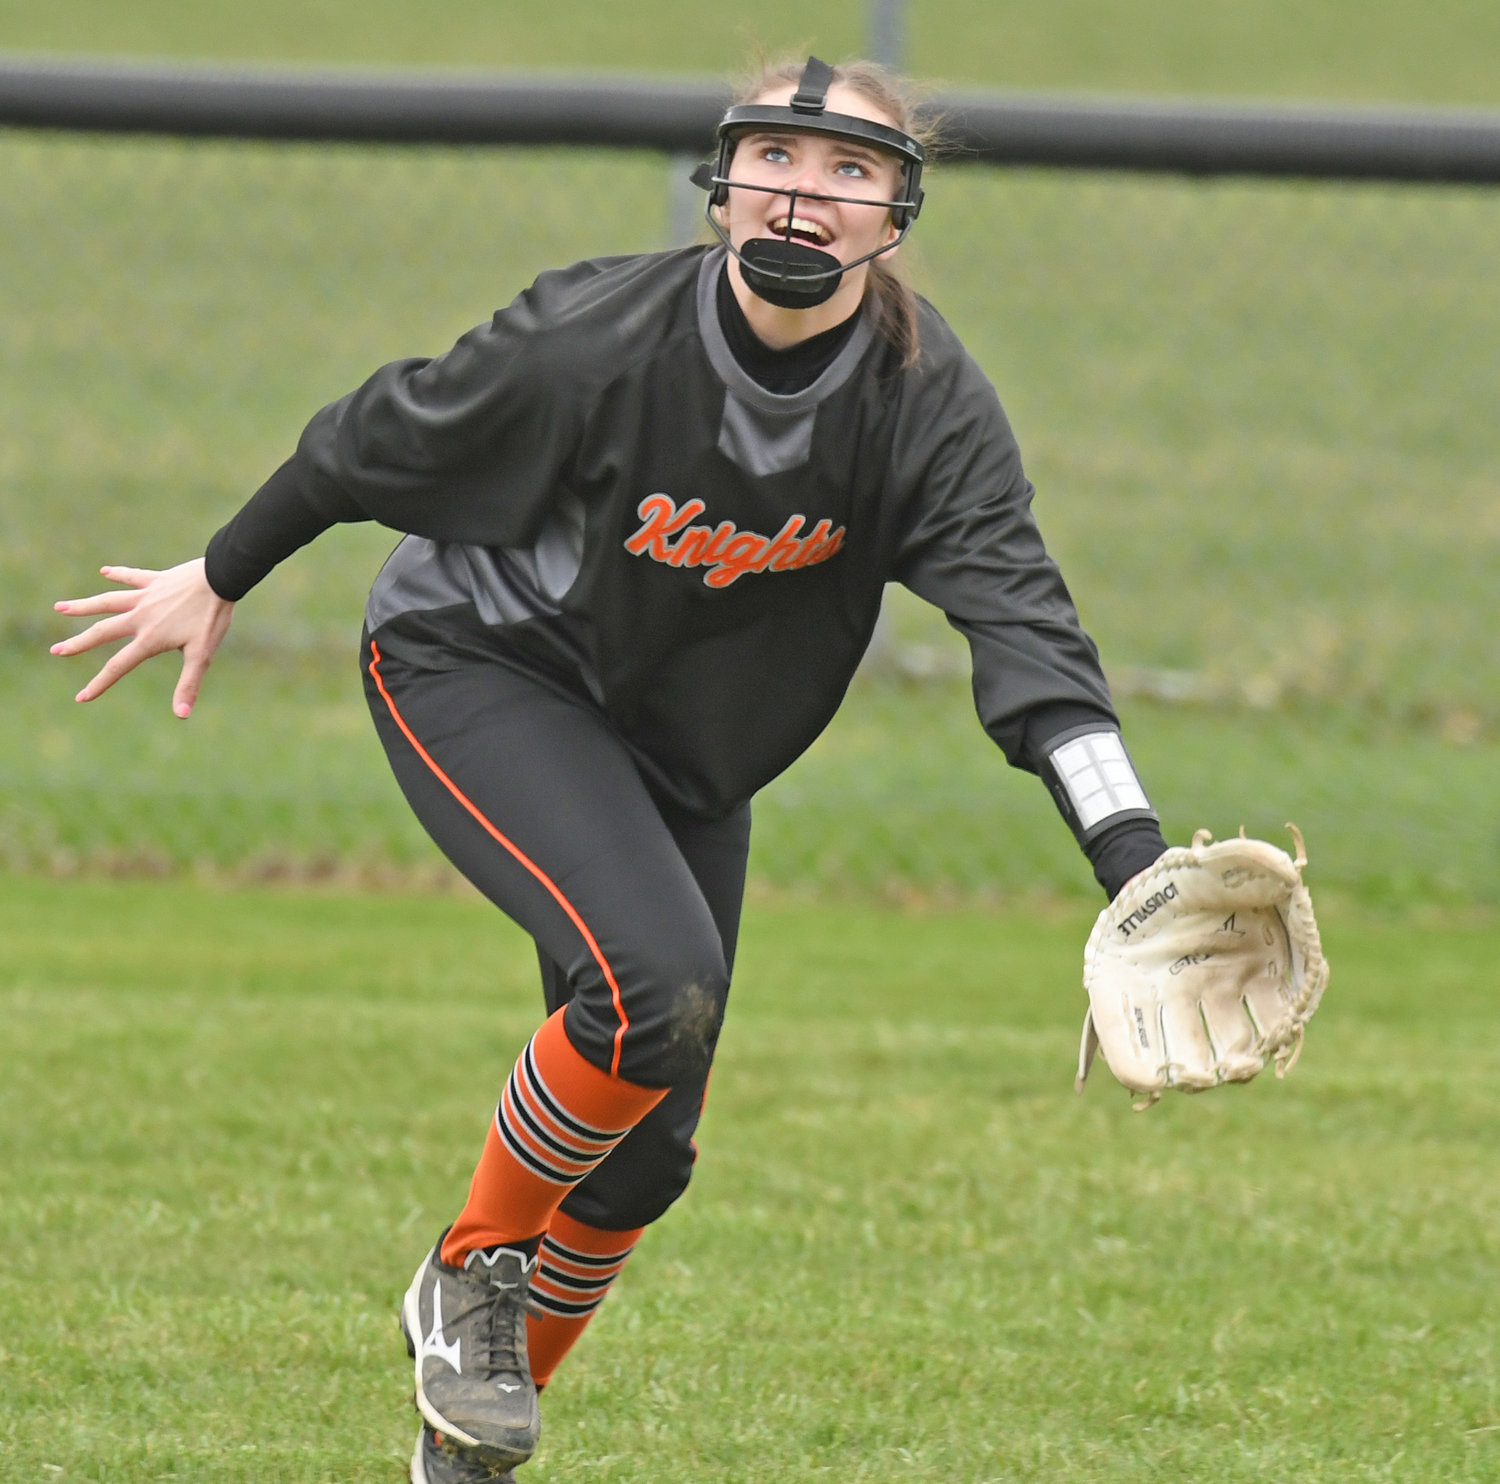 EYE ON THE BALL — Rome Free Academy right fielder Kelly O'Neil tracks the ball in the first inning of Monday's windy contest at home at Kost Field against Fayetteville-Manlius. The ball dropped in for a hit on the play but RFA held the Hornets scoreless in the inning. F-M won 4-3.